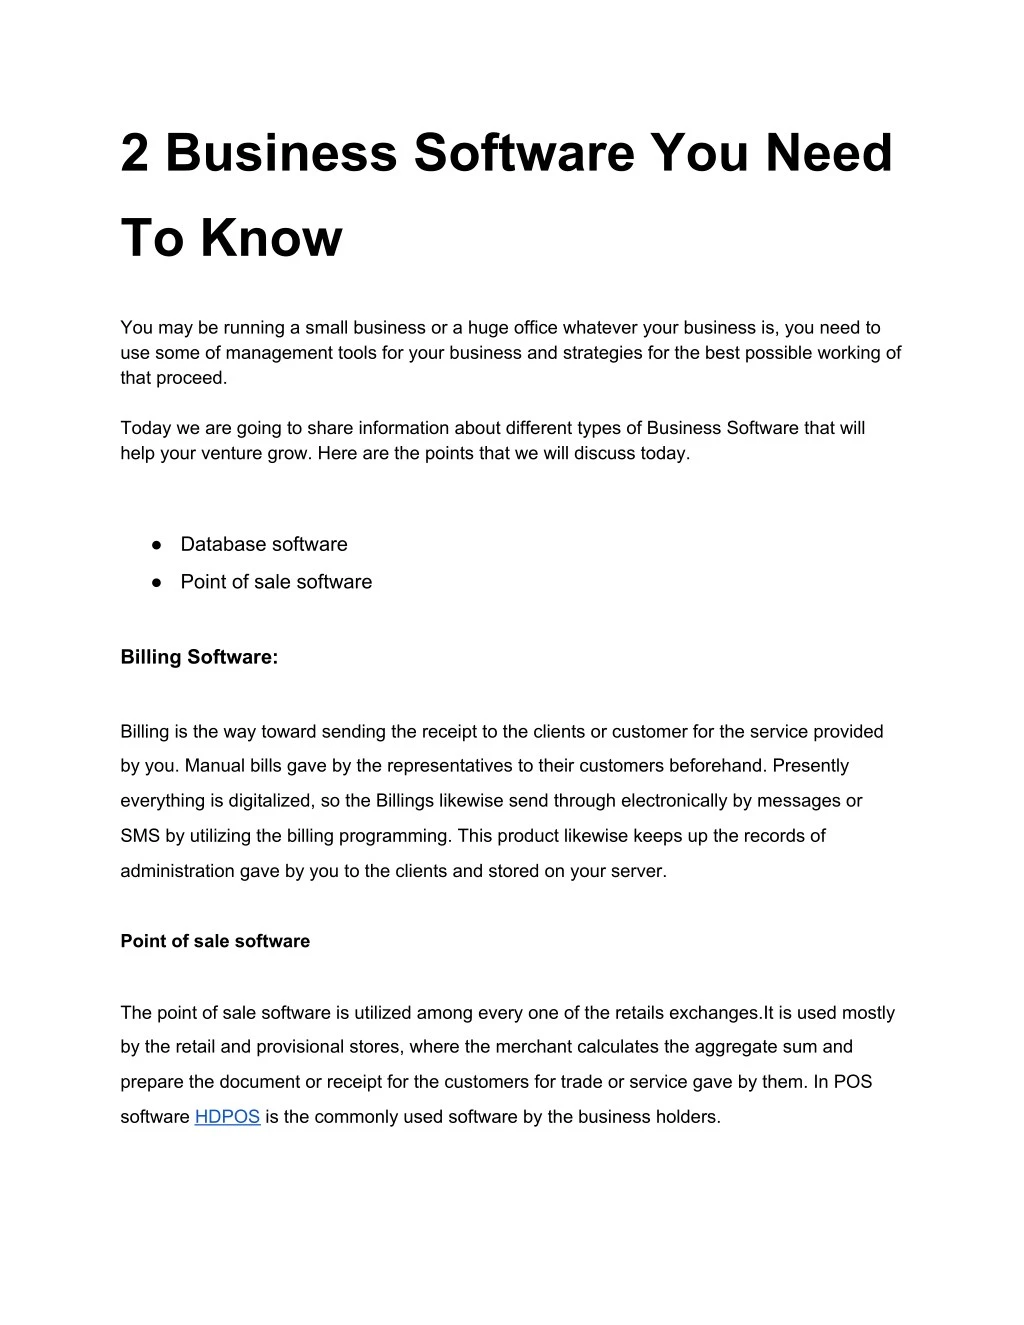 2 business software you need